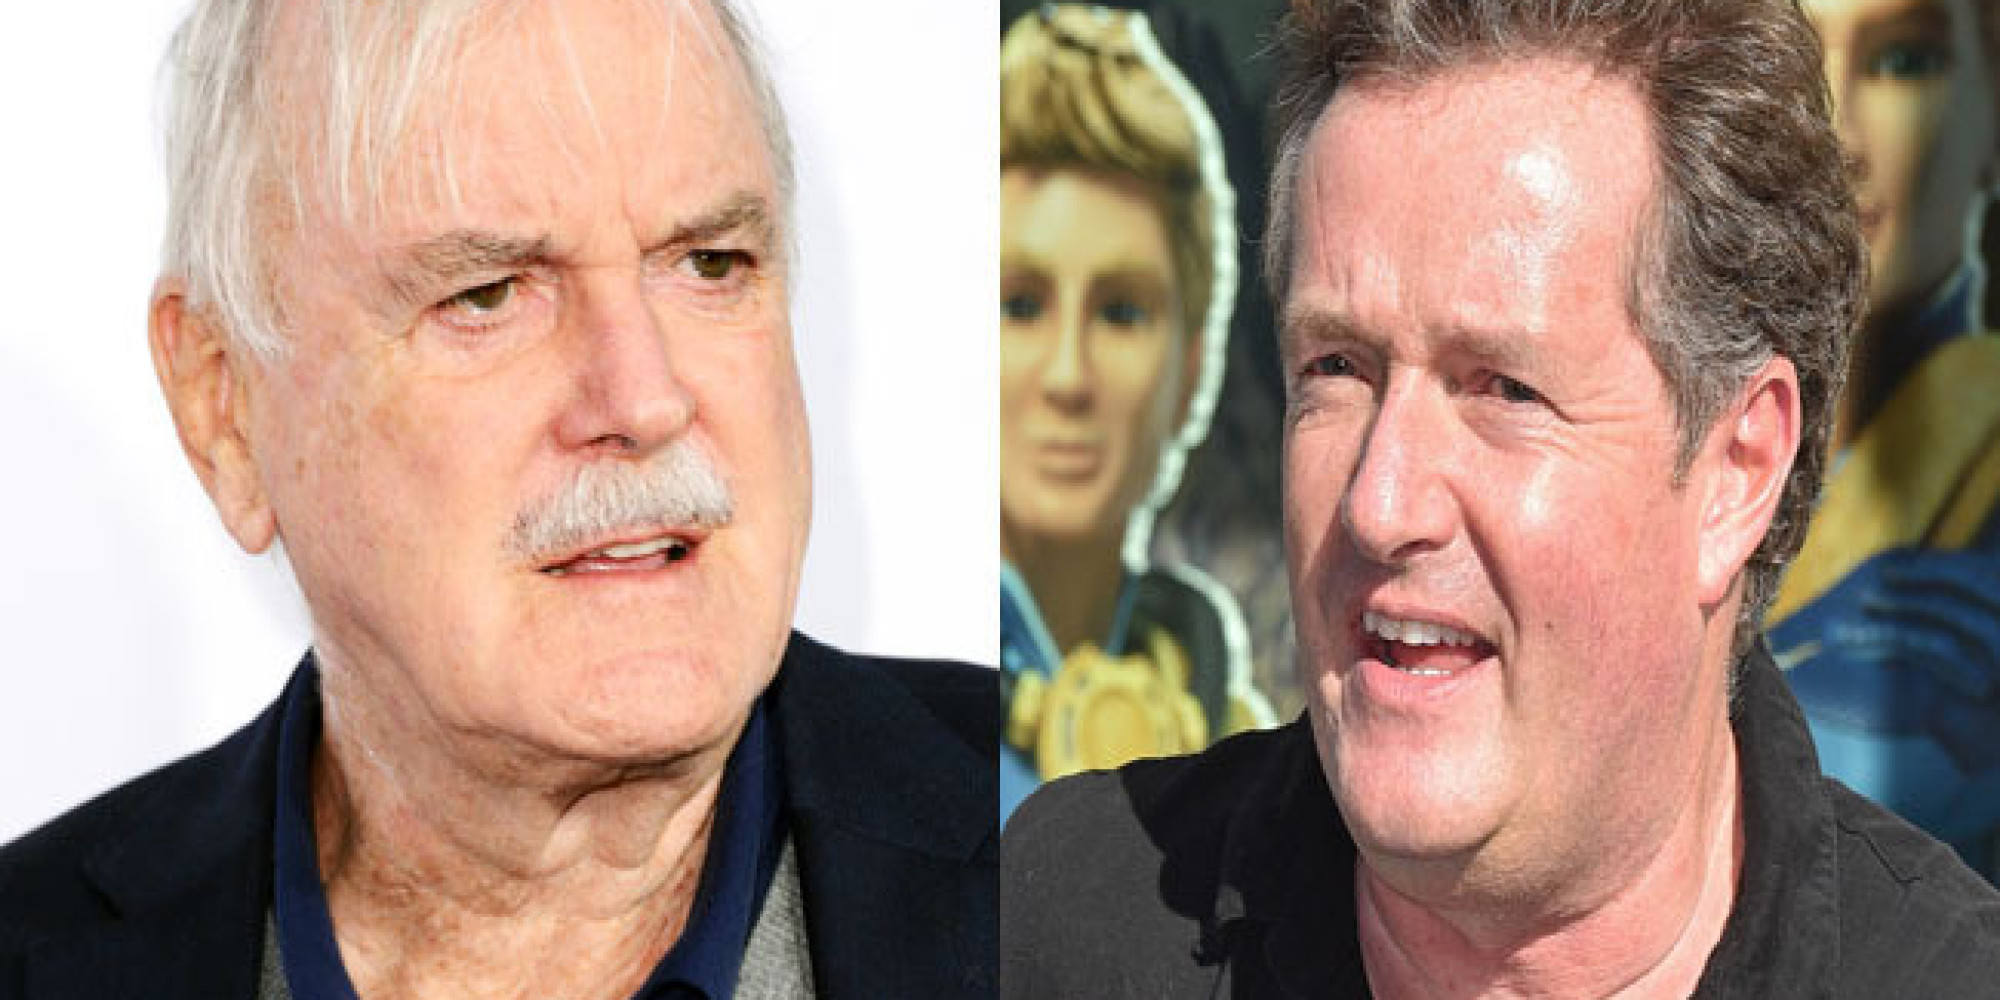 Piers Morgan Apologises To John Cleese Over Twitter Spat. Kind of... | HuffPost UK2000 x 1000